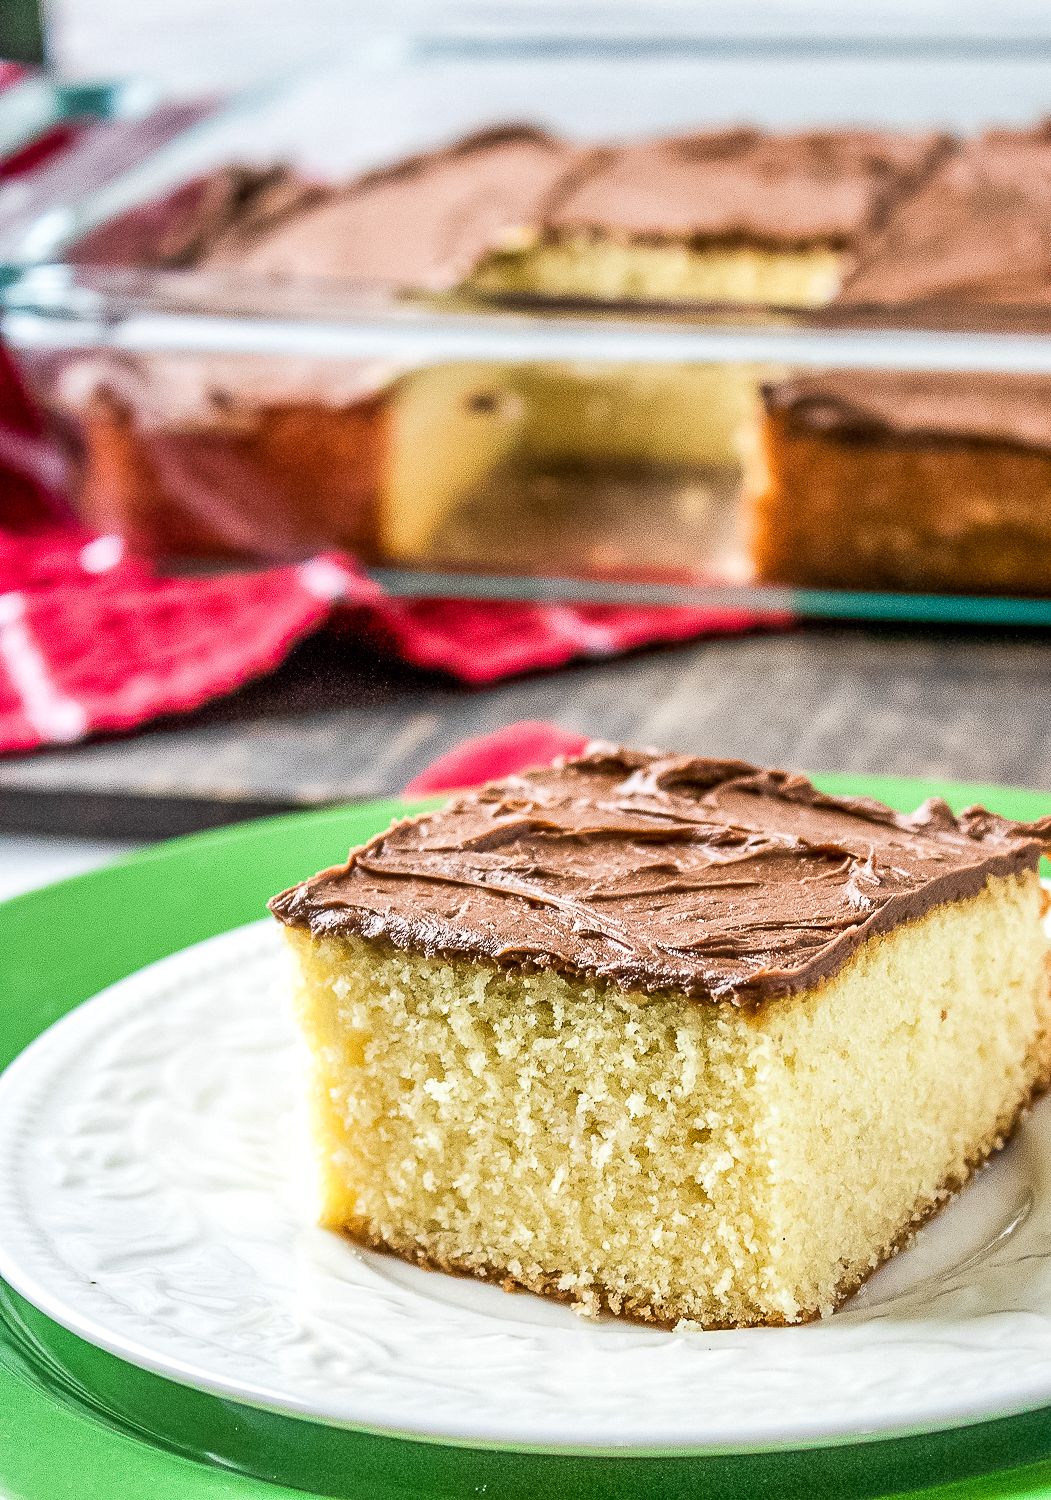 This easy yellow sheet cake recipe is perfect for any occasion! It's moist, fluffy, and topped with a rich chocolate buttercream frosting.